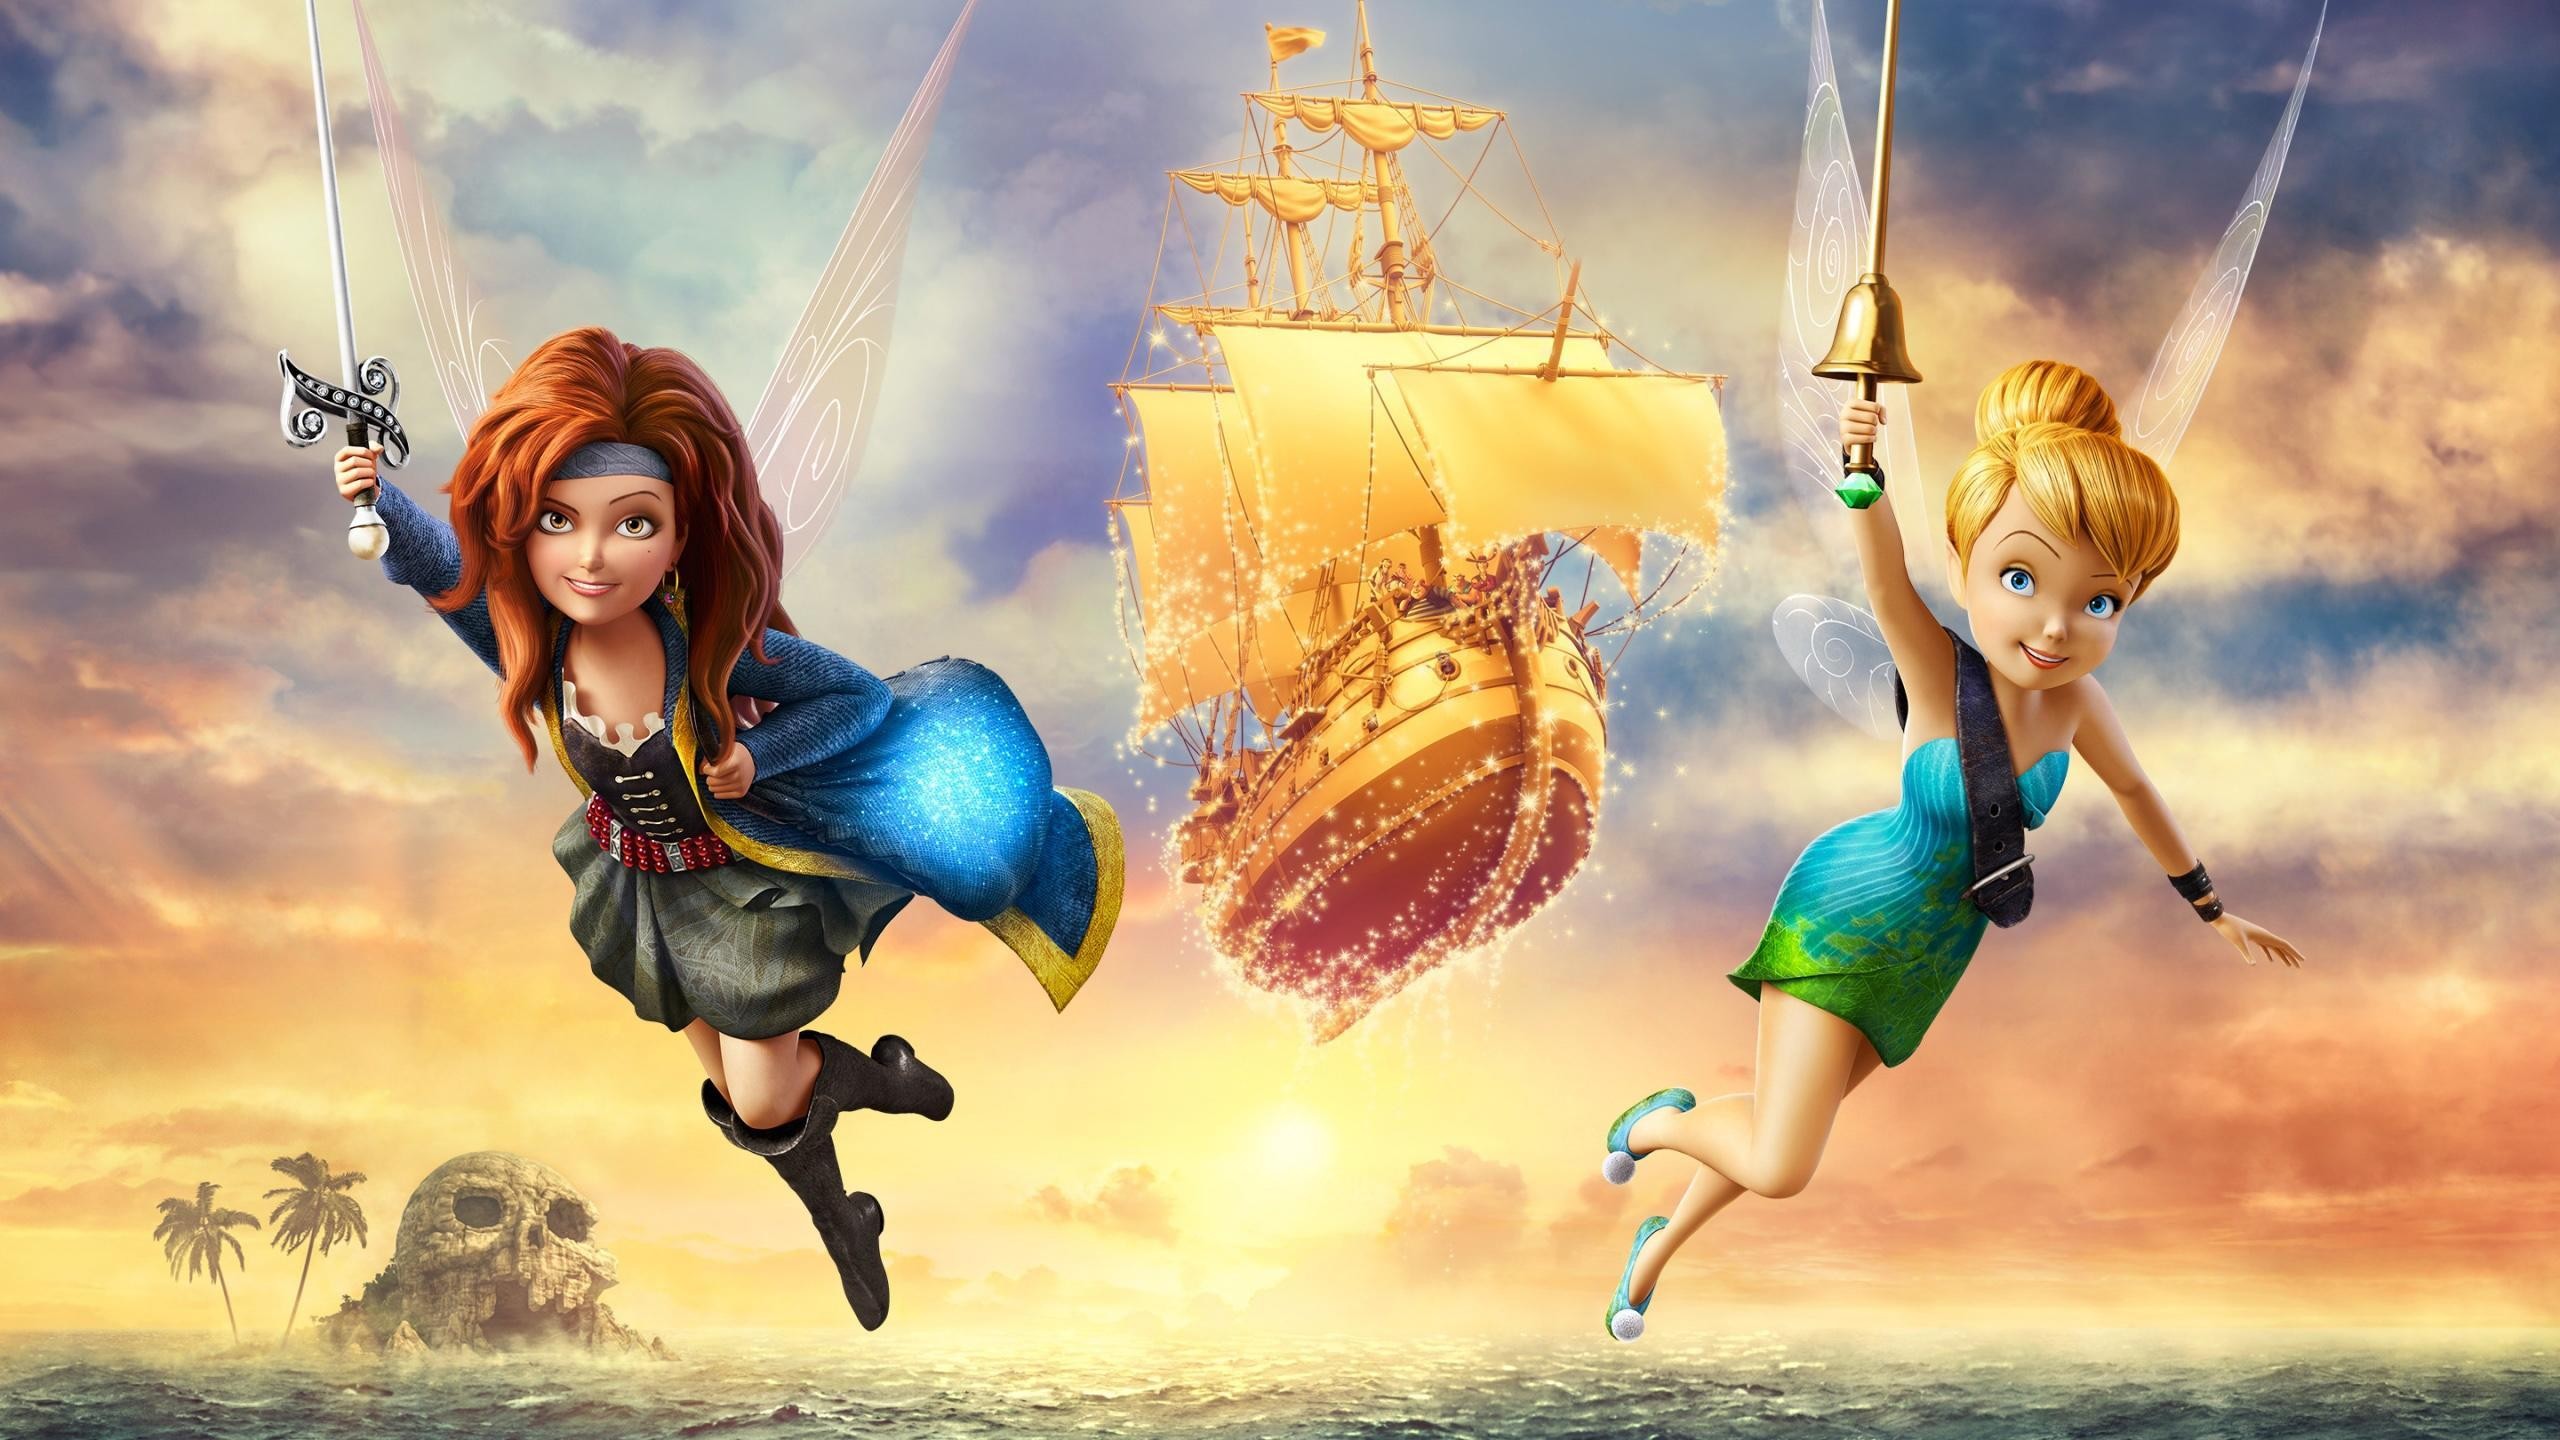 movie, the pirate fairy, fairy, pirate ship, tinker bell